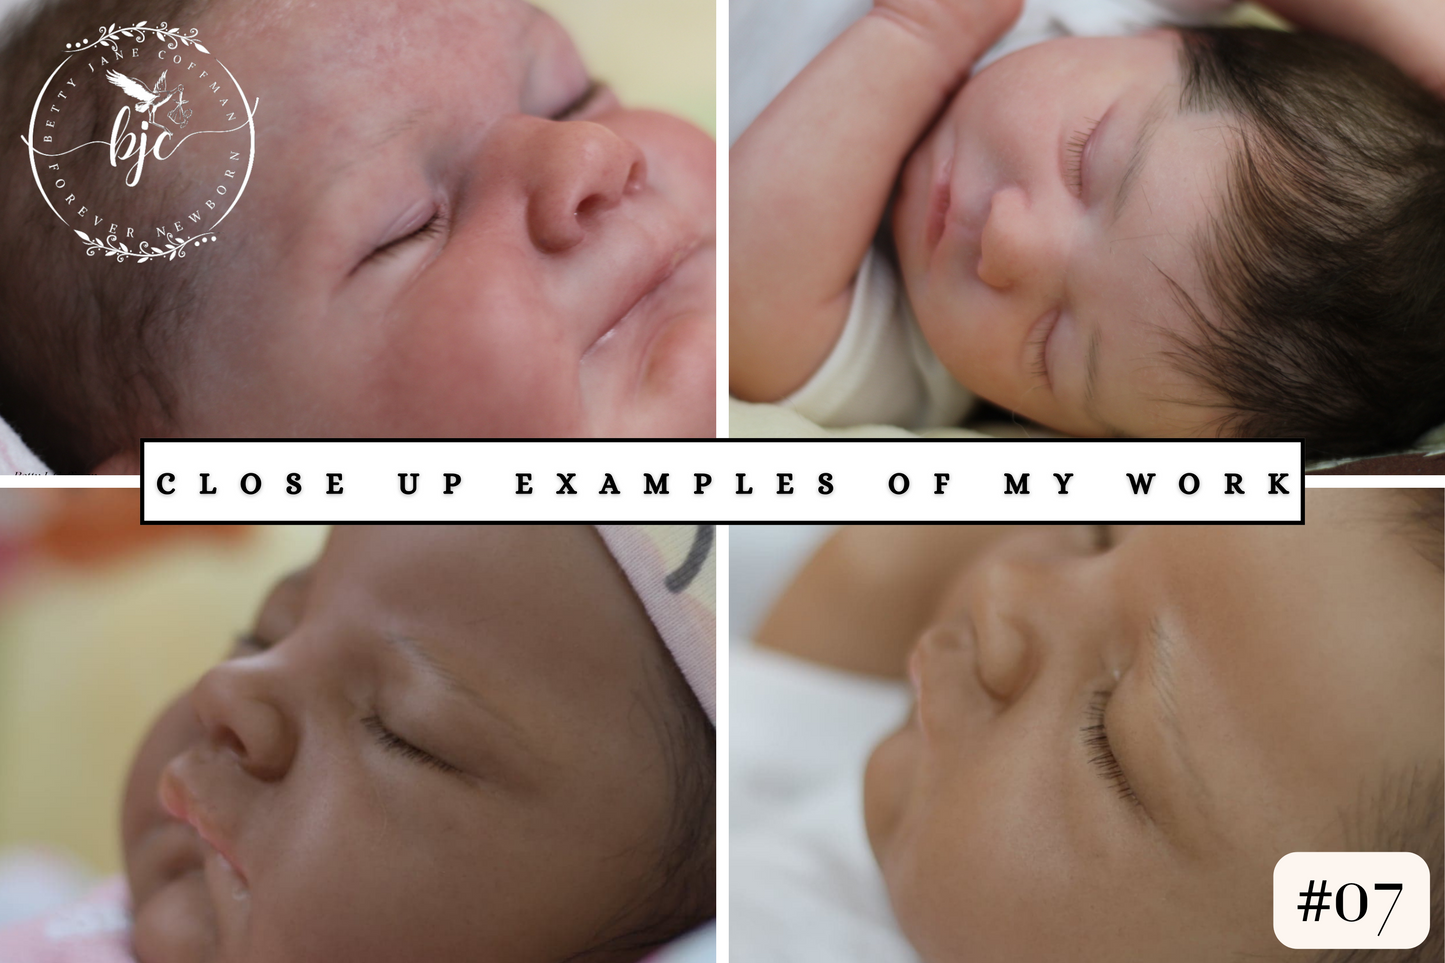 Ultra-Realistic ReBoRn BaBy ~ Arianna By Jamie Lynn Powers **Examples Of My Work Included (21"+Full Limbs)